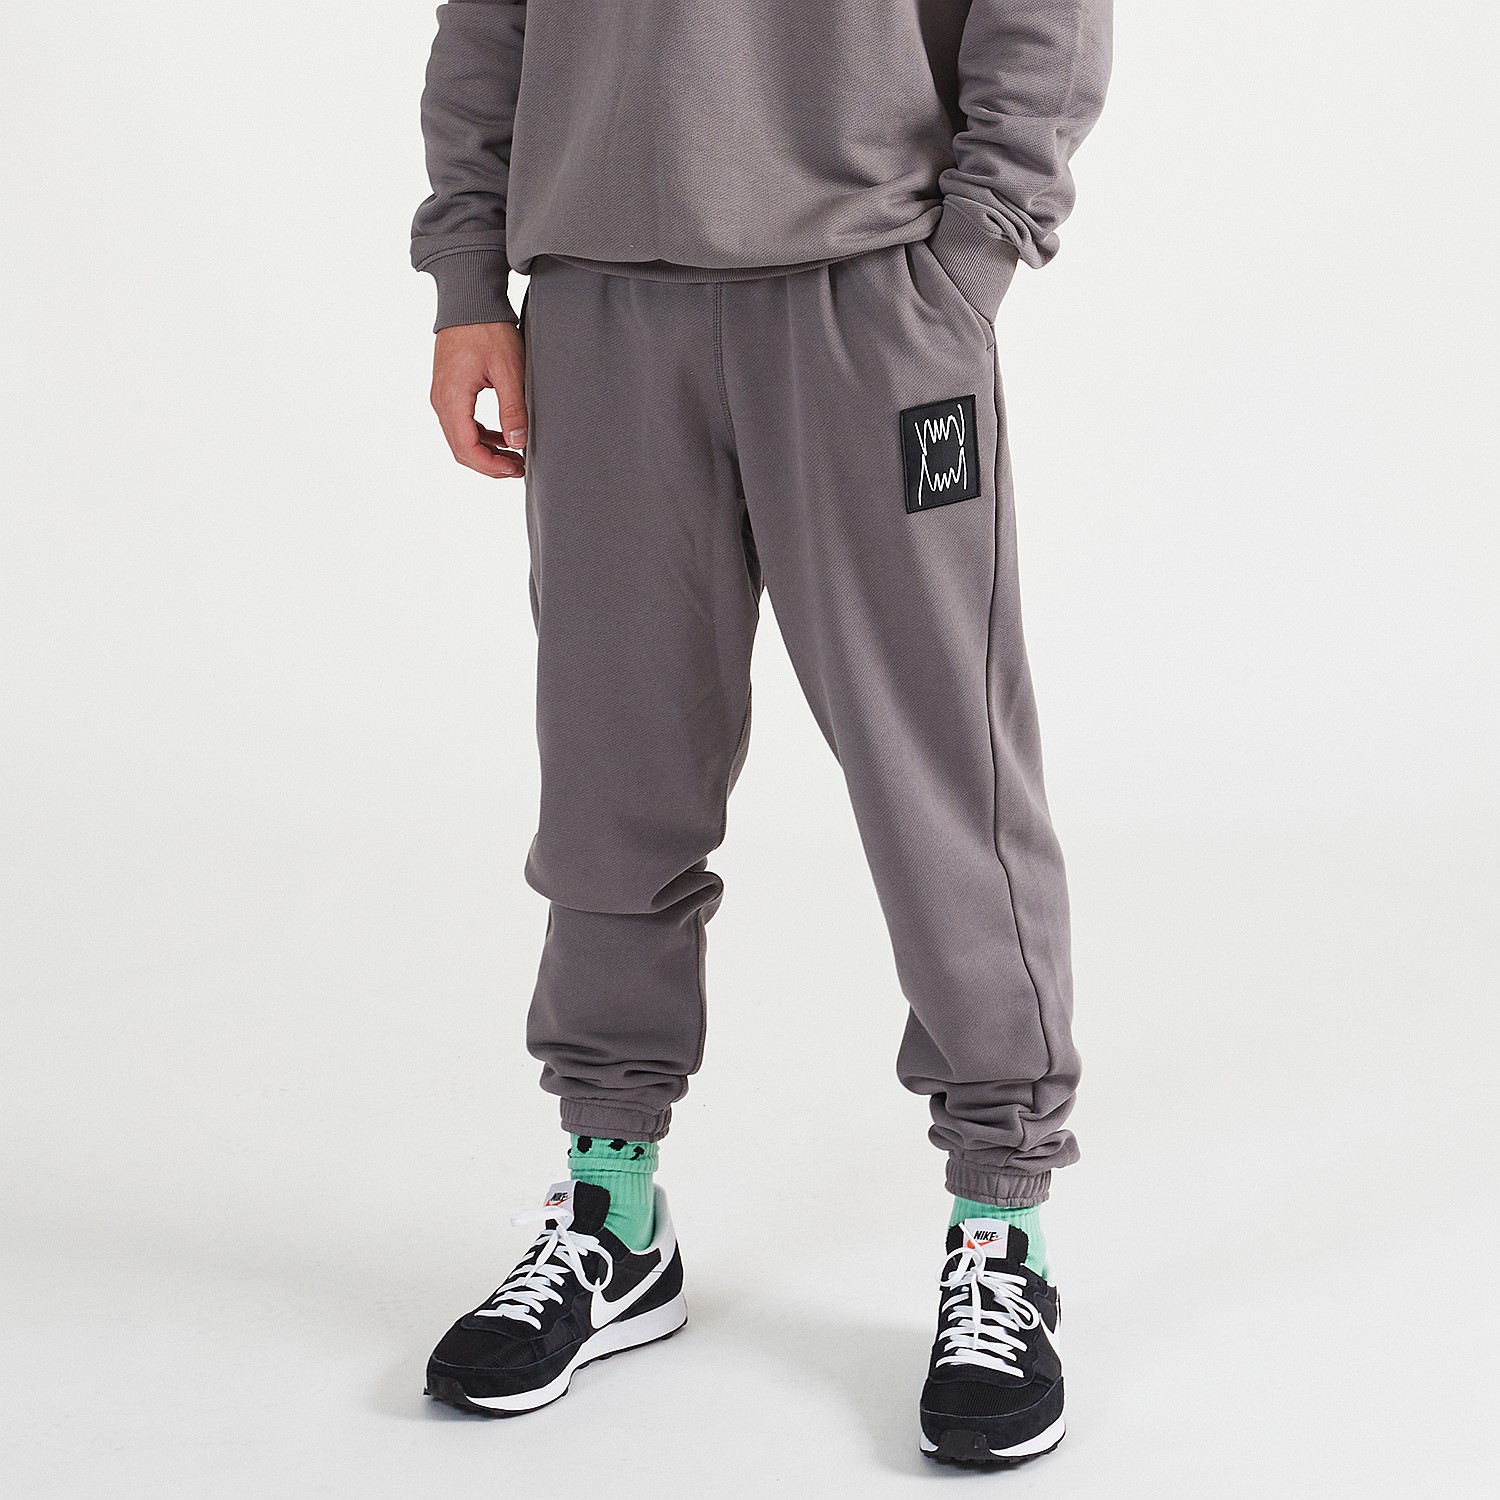 Men's Pants and Sweats | Performance, Comfort and Style | Stirling ...